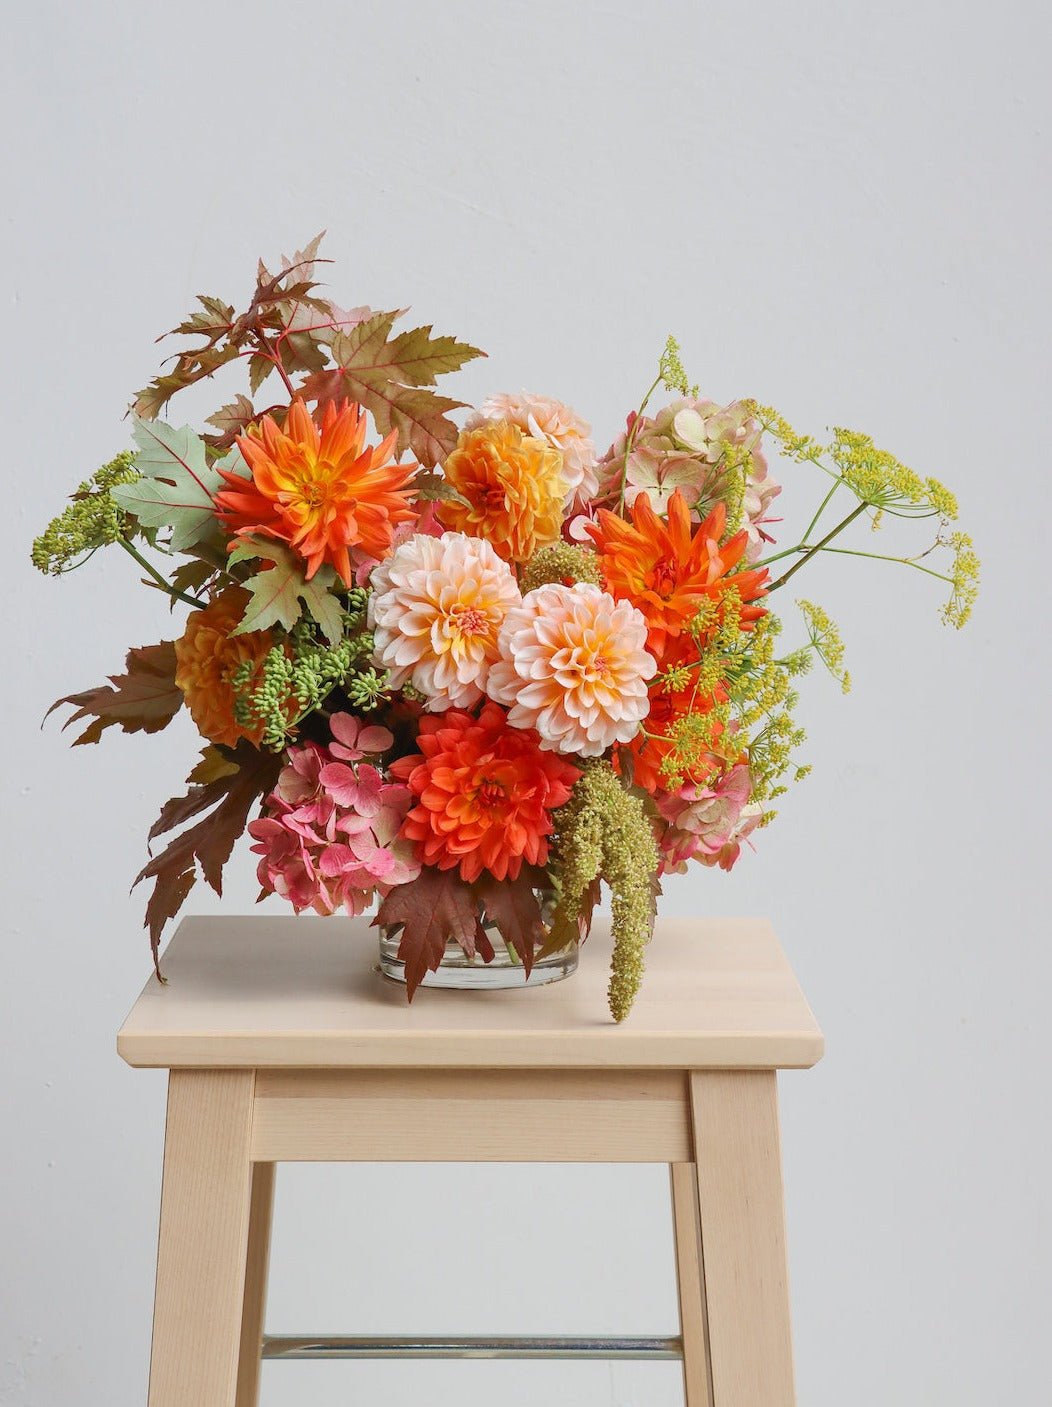 A floral arrangement in a vase featuring warm autumnal colours. The flowers/foliage pictured are Dahlias, Hydrangea, Amaranthus and Maple leaves. The arrangement is sitting on a light wooden stool in front of a white background. 